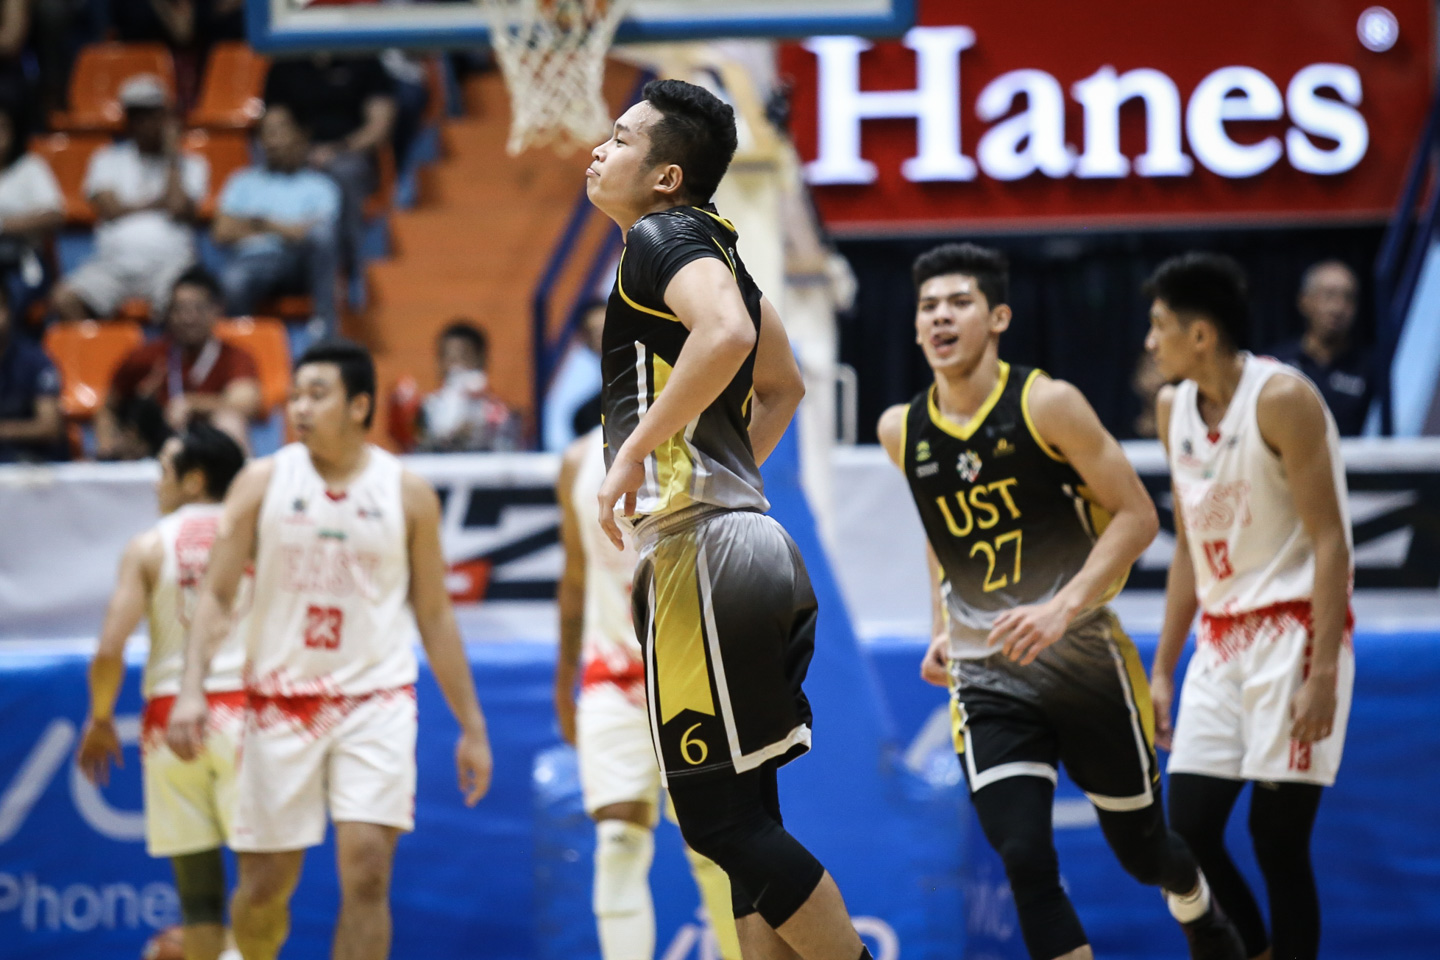 rookie Cansino drops triple-double 